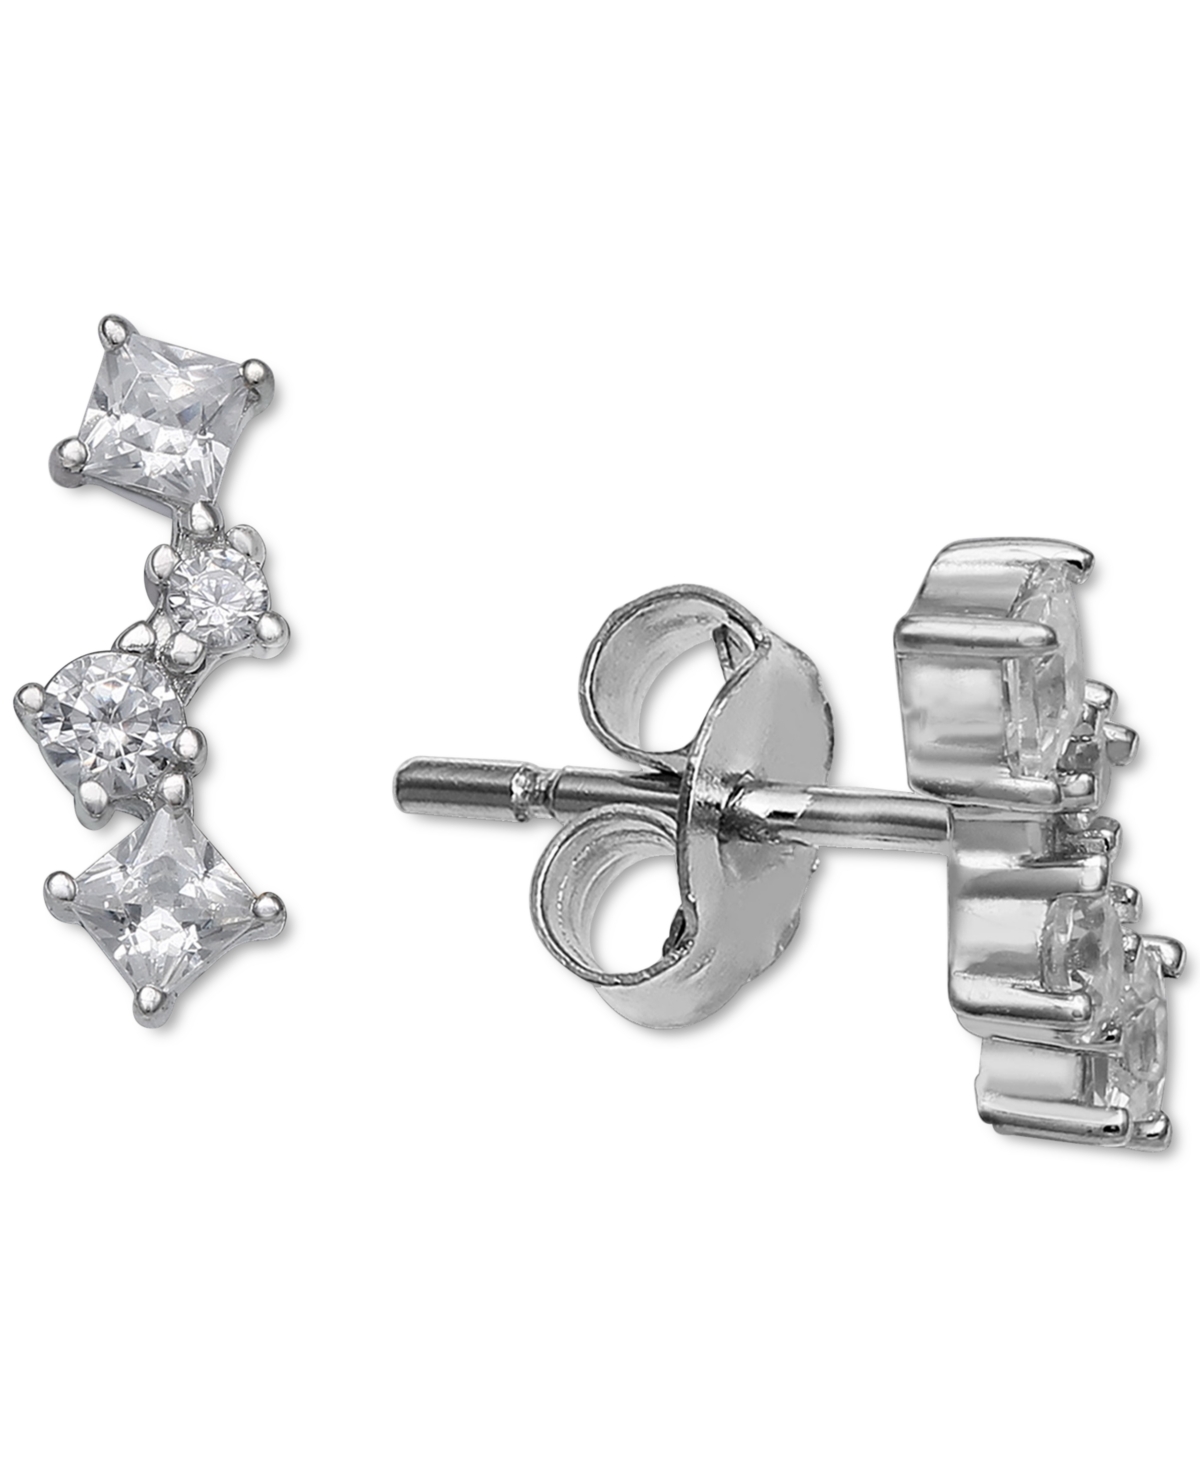 Cubic Zirconia Multi-Shape Earring in Sterling Silver, Created for Macy's - Sterling Silver